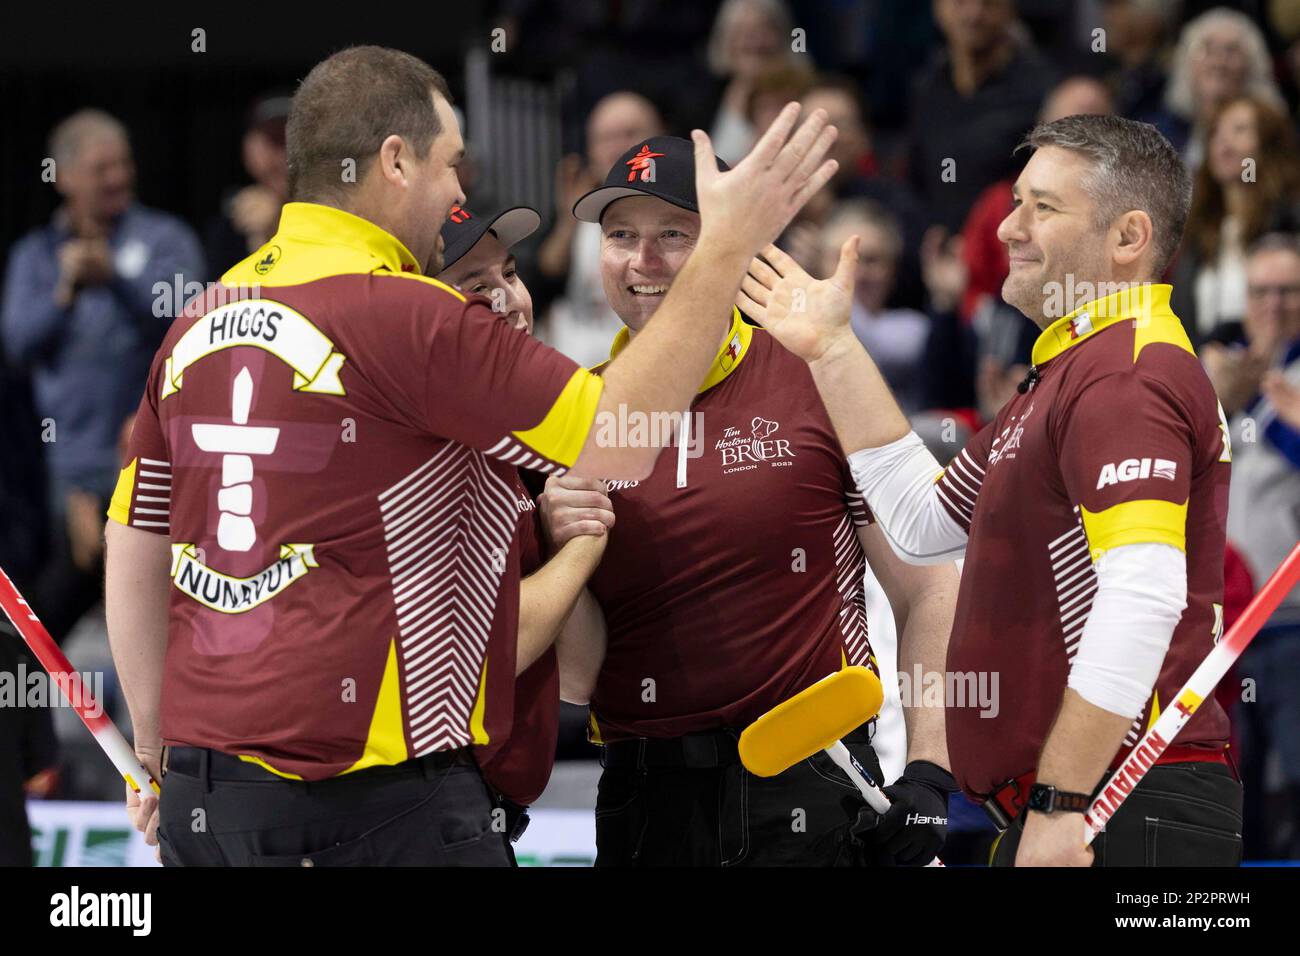 Team Nunavut celebrate their win over Team Newfoundland and Labrador during the Tim Hortons Brier curling event, Saturday, March 4, 2023, in London, Ontario